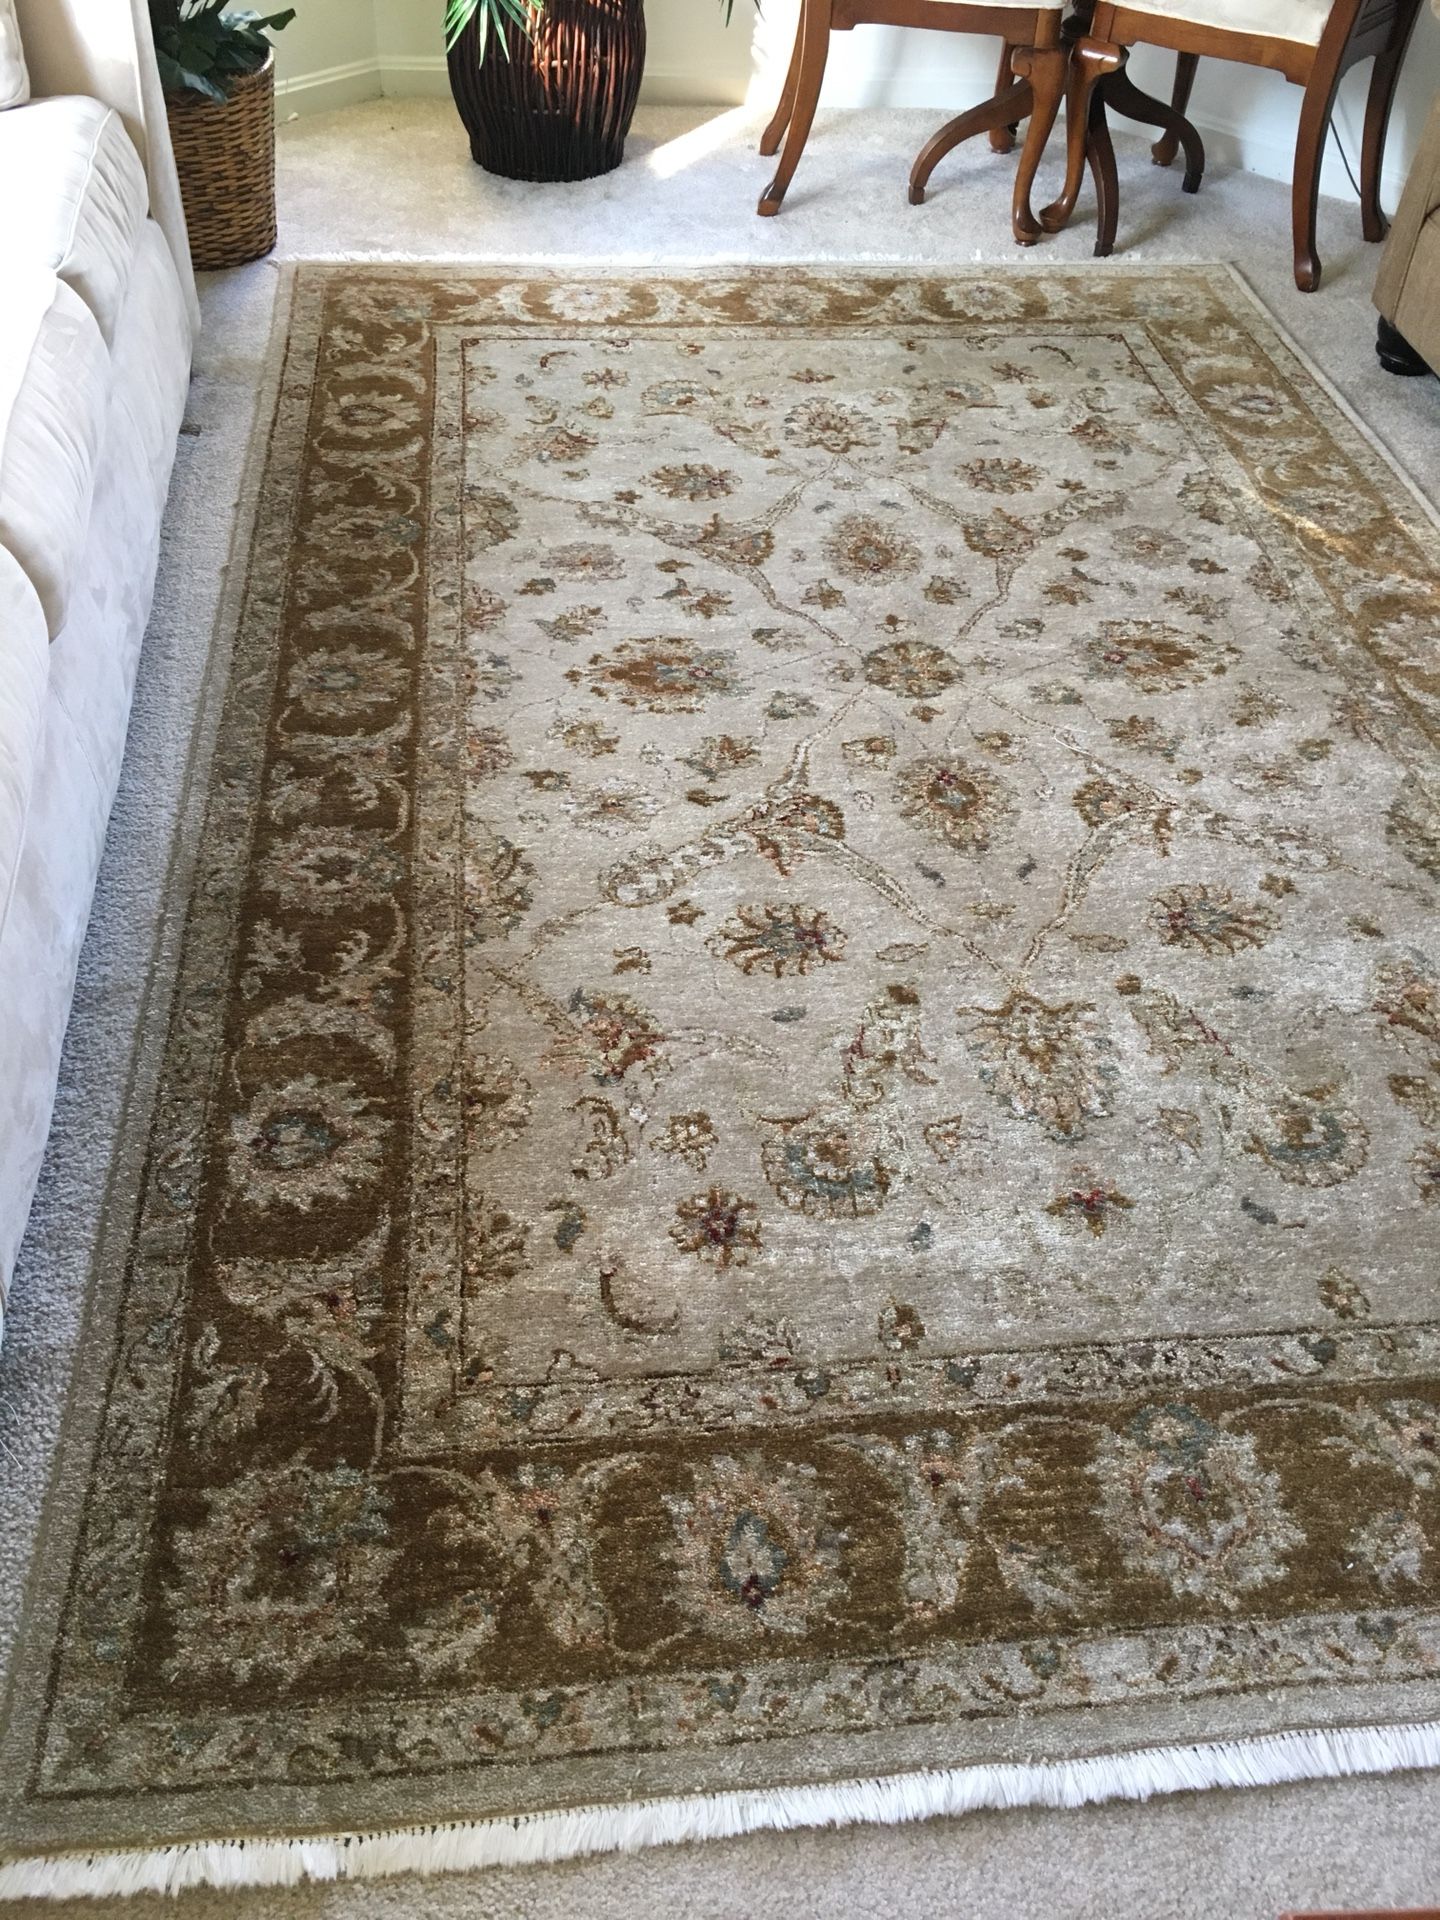 Large Ethan Allen hand woven Persian wool rug 10x7